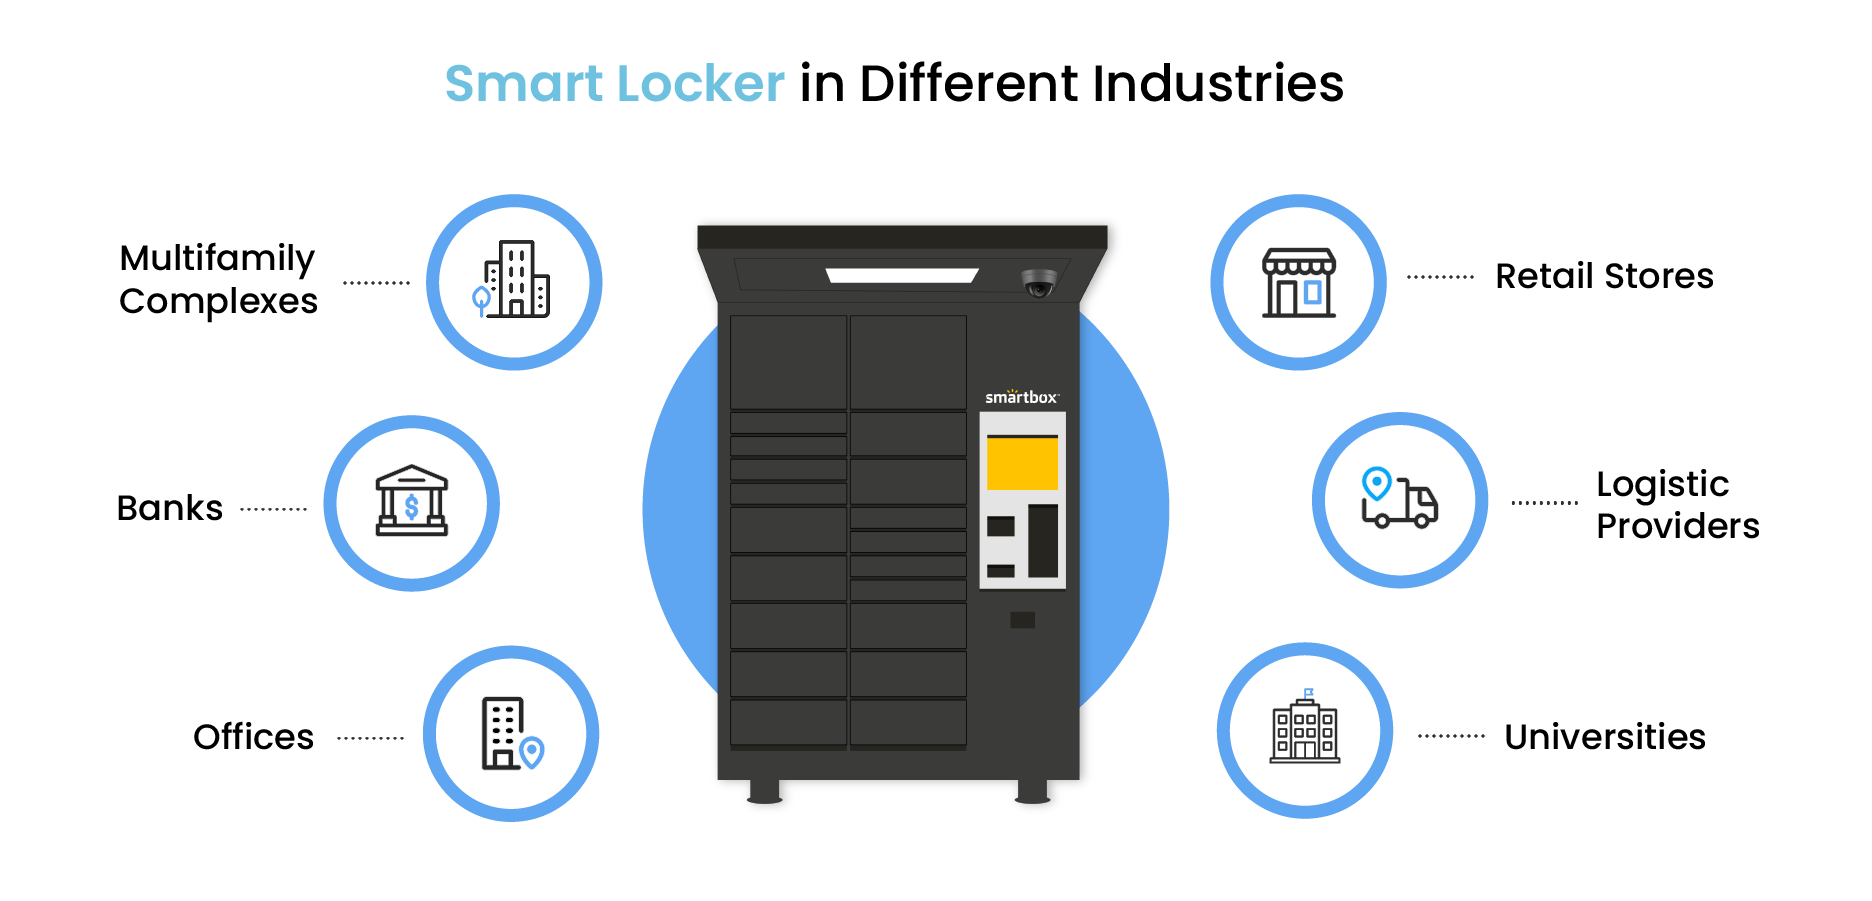 Smart locker system on a blue circle 3 circles each side by side representing 6 different industries smart lockers fit it